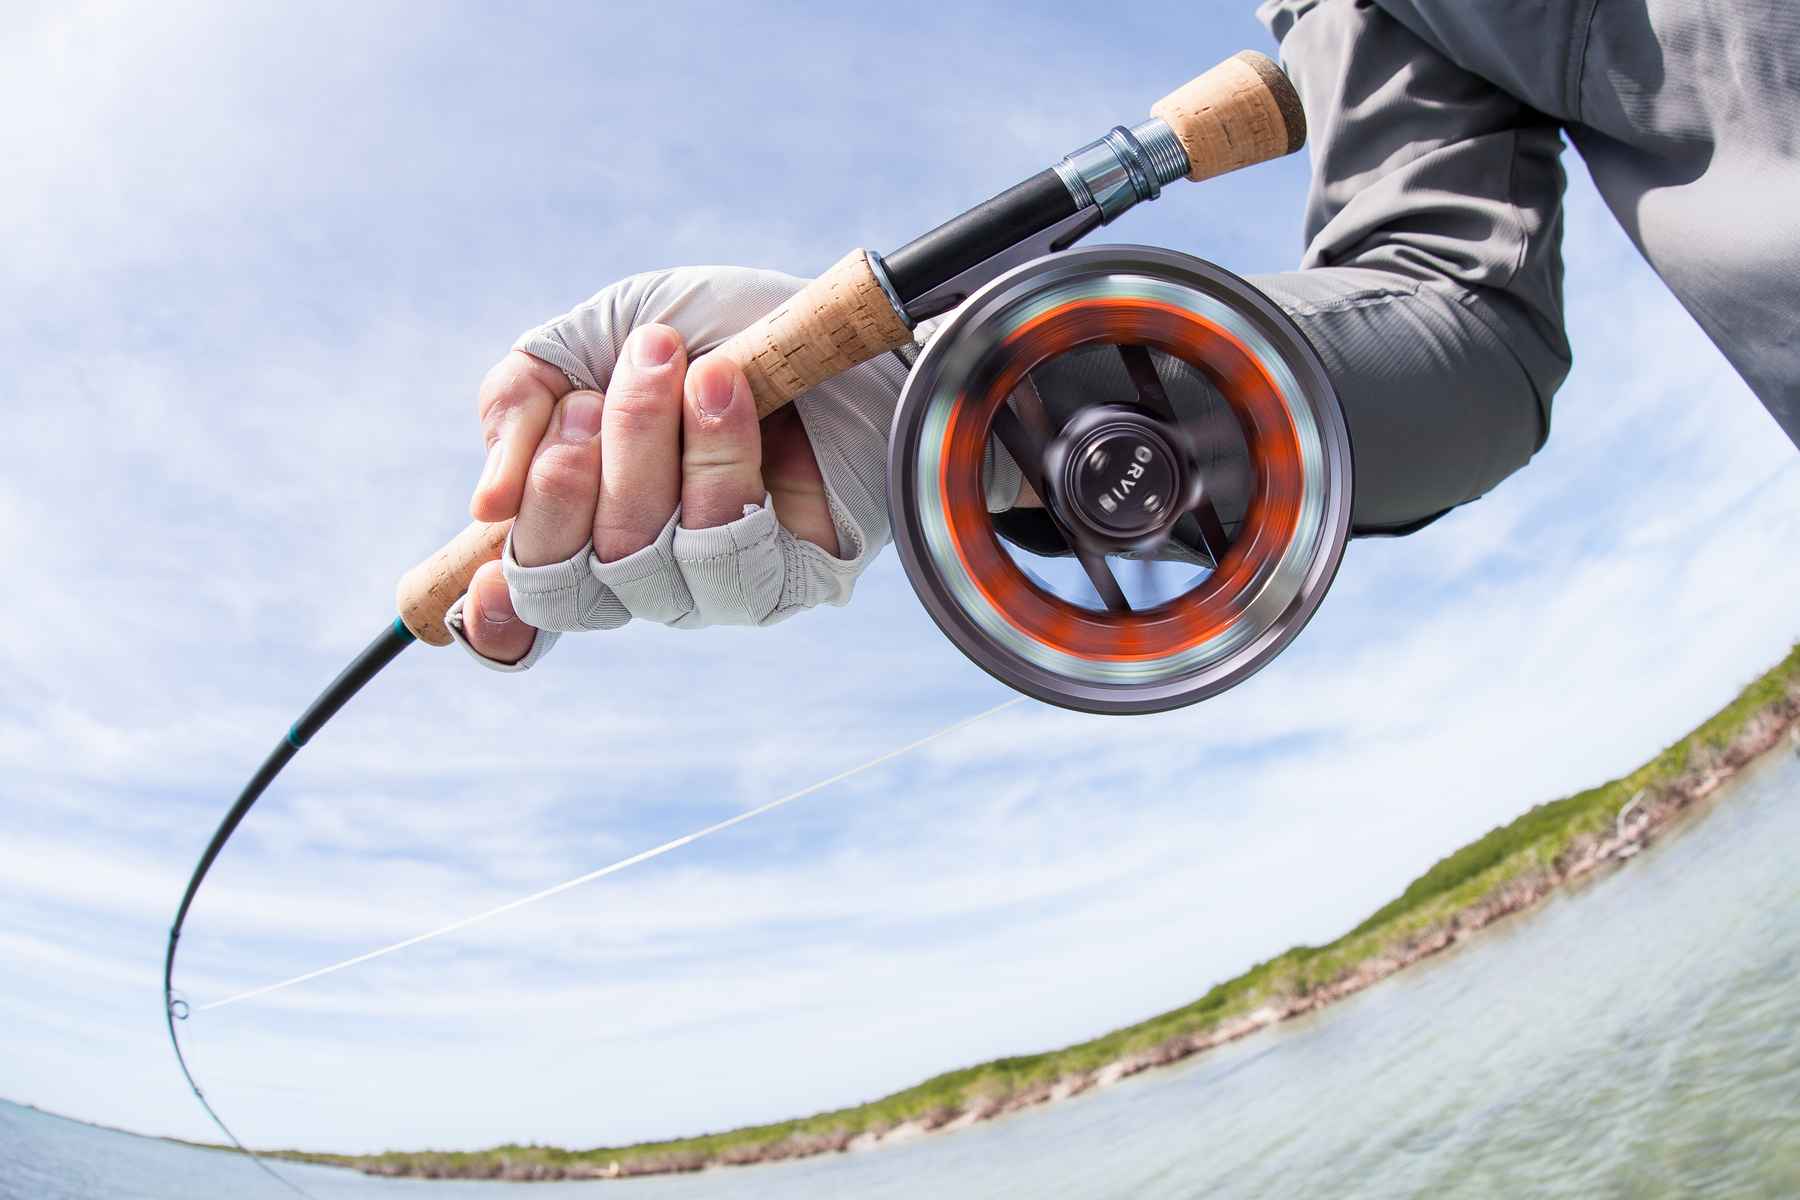 How To Set The Drag On A Fishing Reel, by Daniel Wade, Life of Fishing